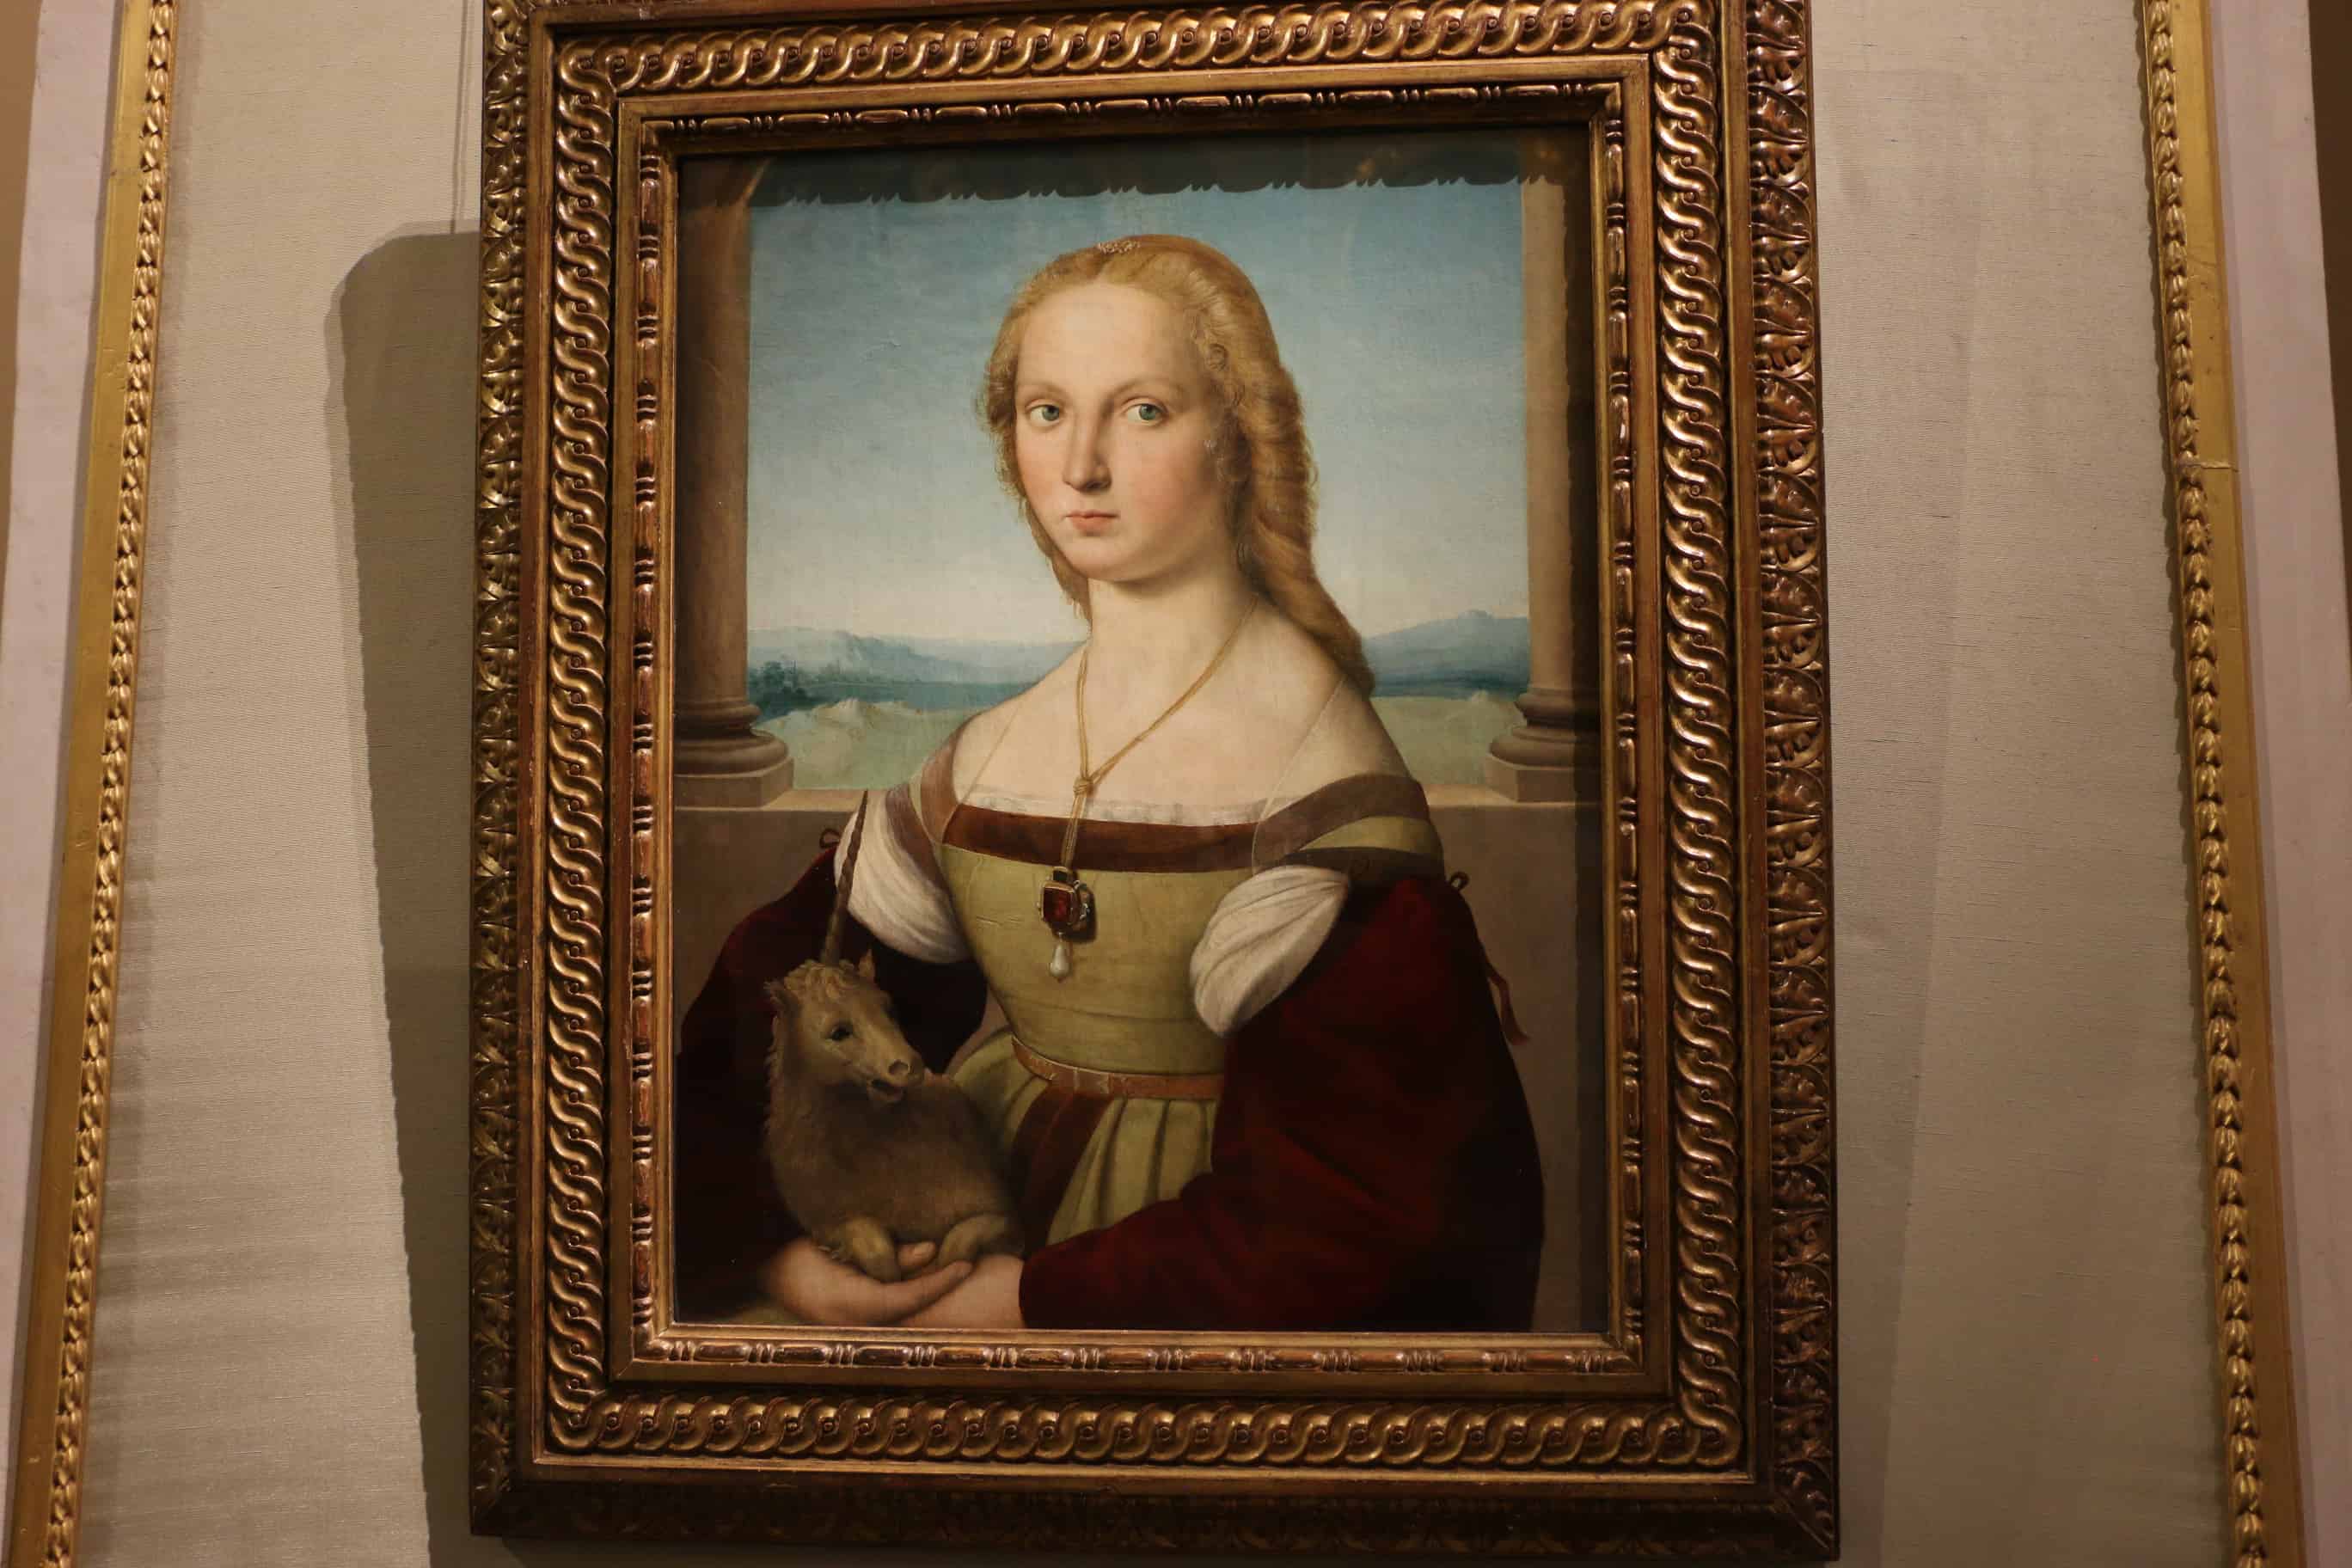 Lady with Unicorn Raphael Borghese Gallery Rome